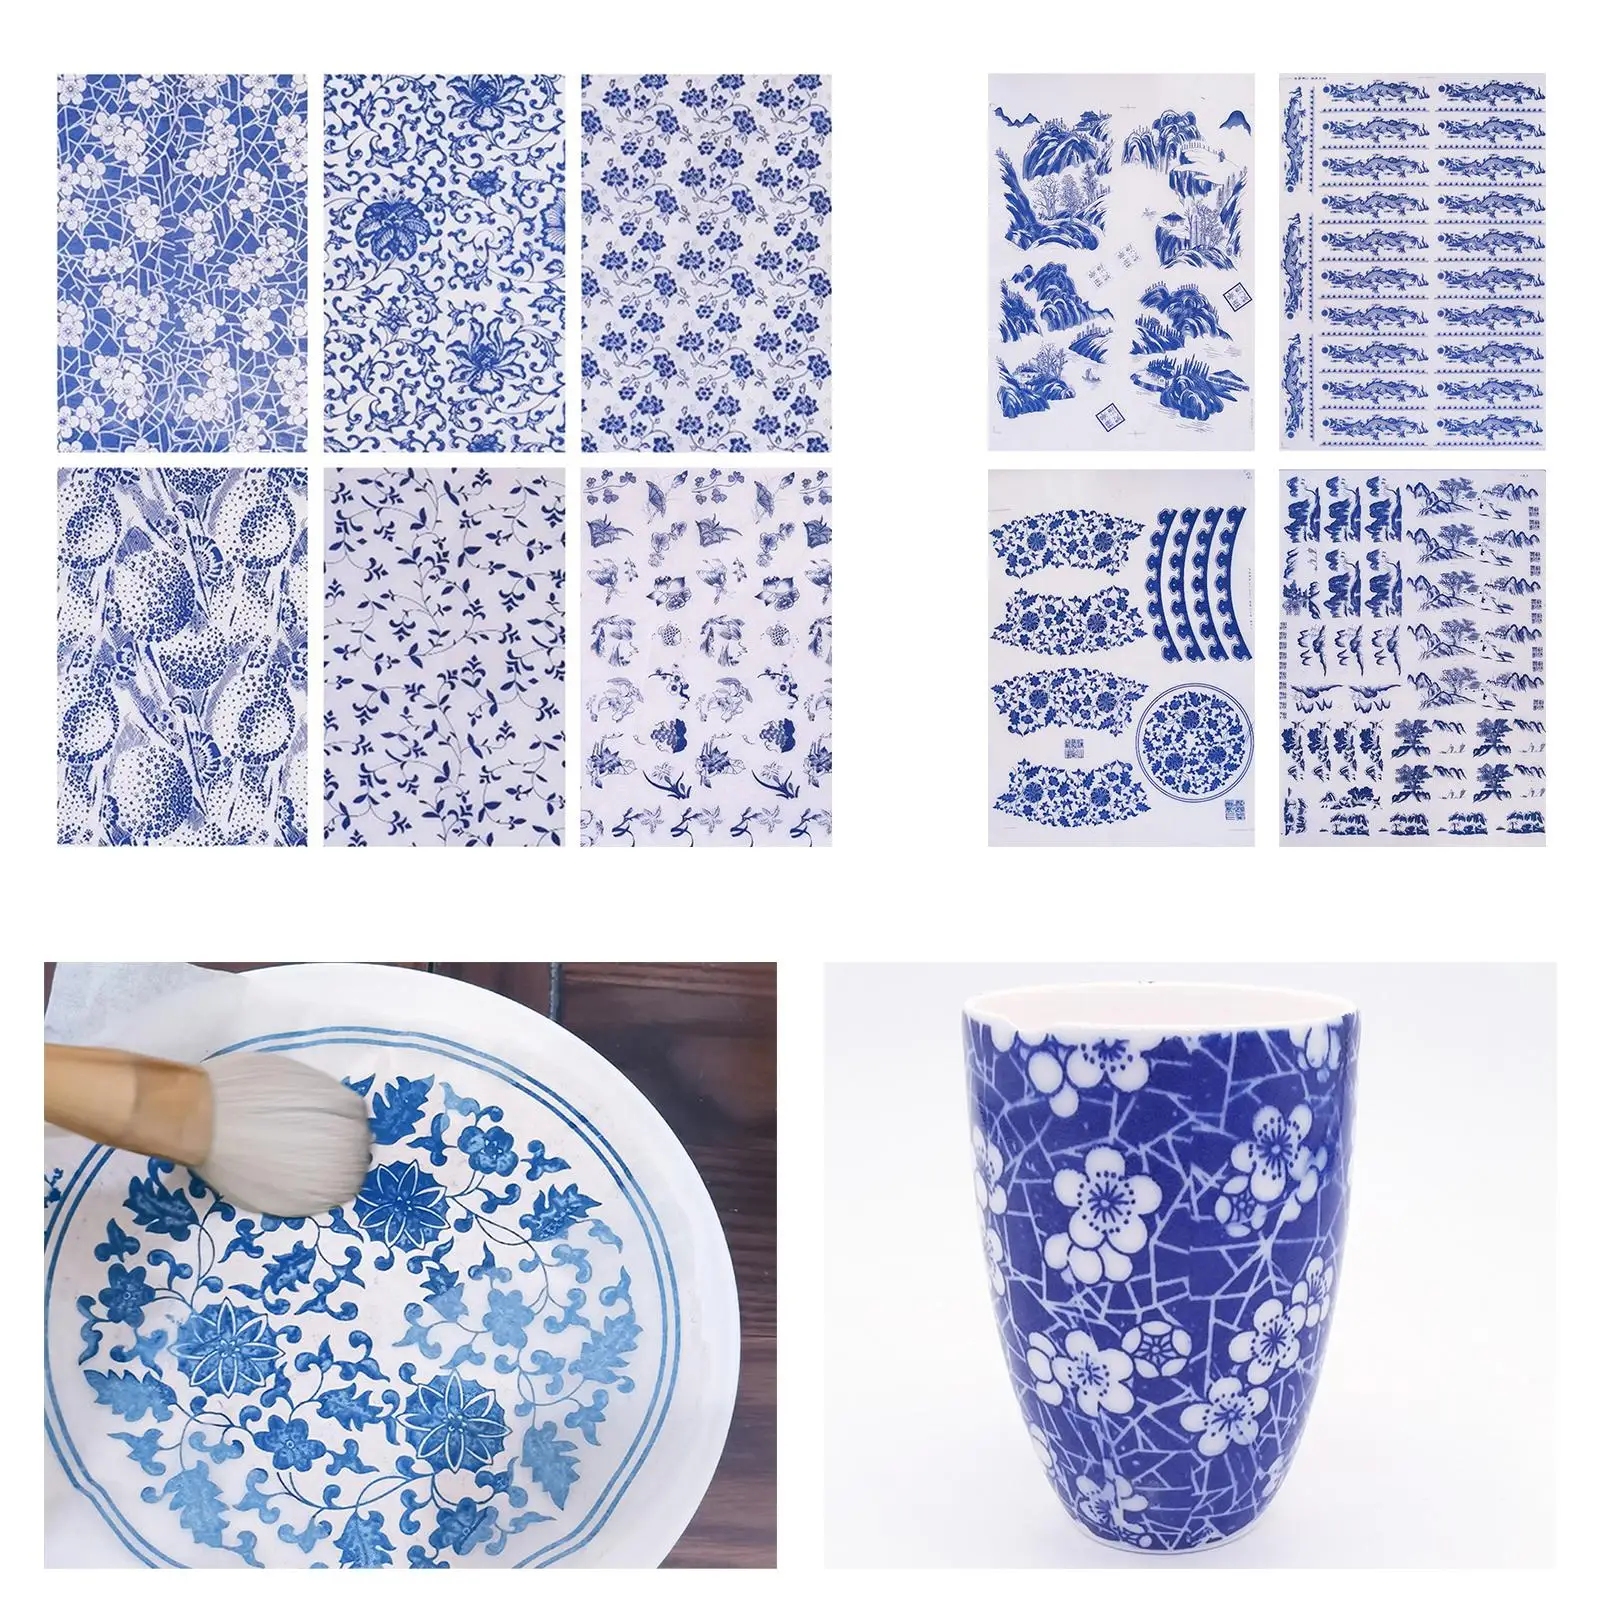 1 Set Ceramics Clay Decal DIY Transfer Paper Colored Flower Paper Underglazed Sticker for Pottery